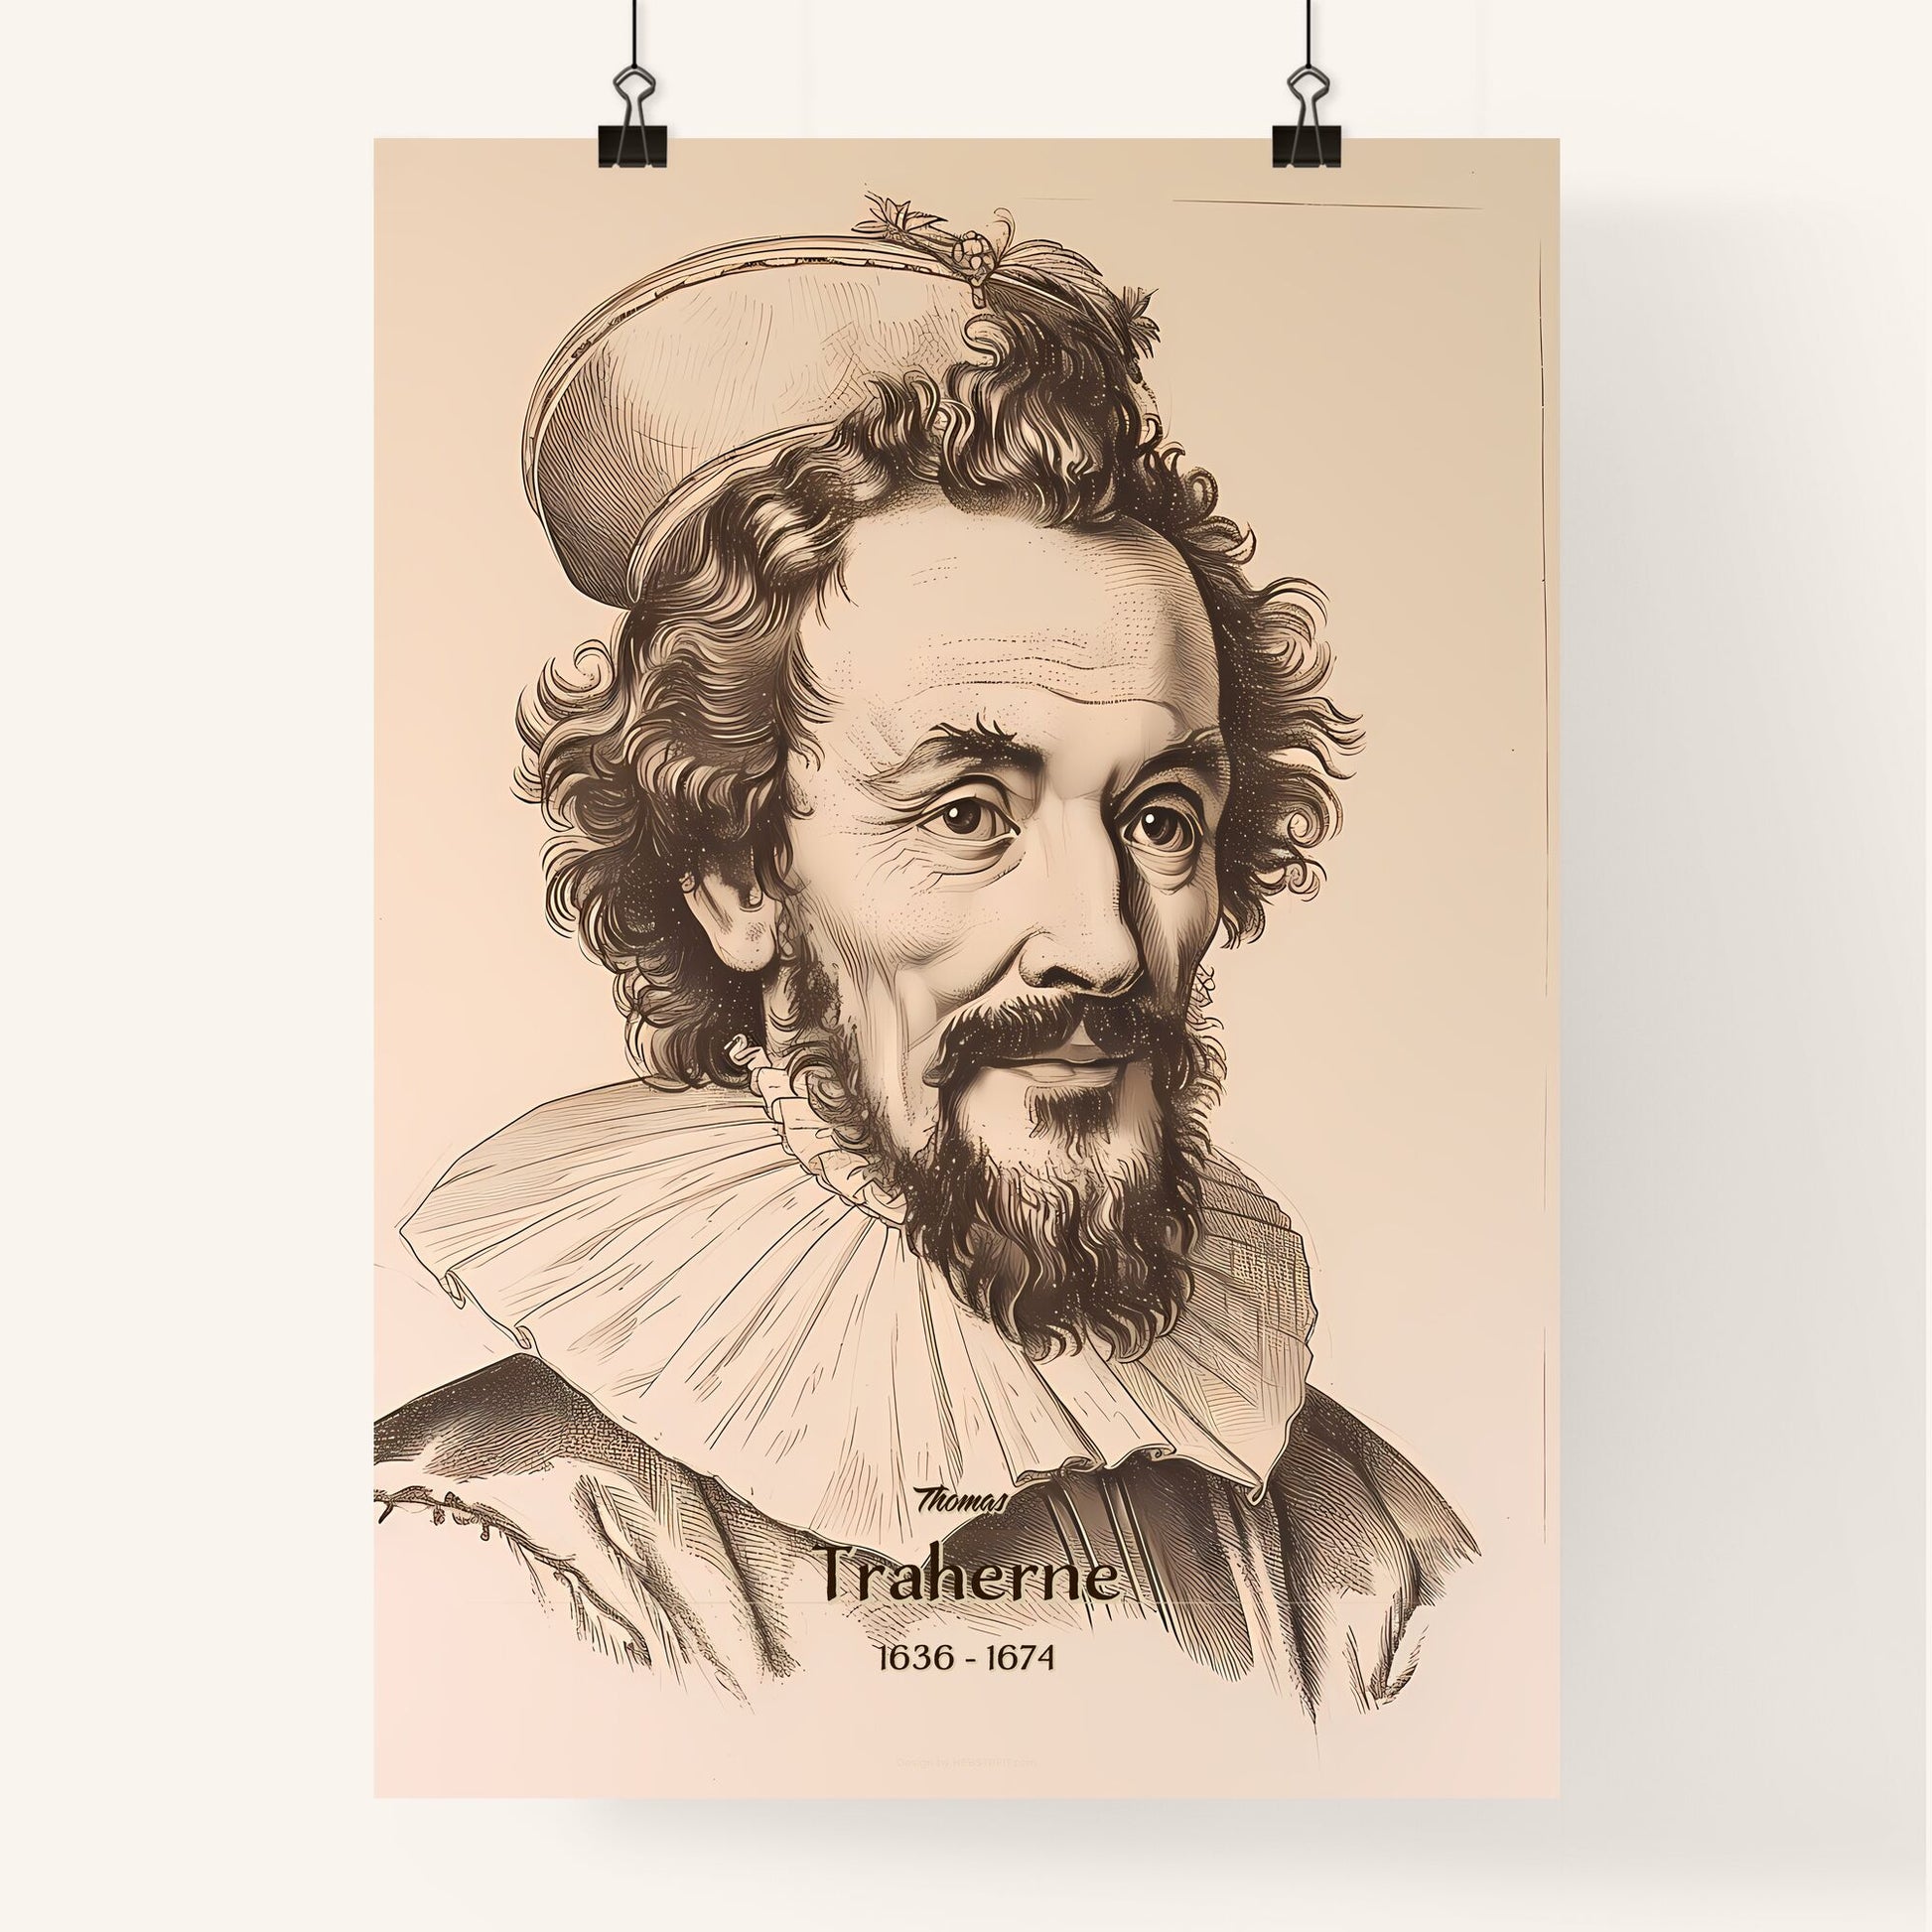 Thomas, Traherne, 1636 - 1674, A Poster of a drawing of a man with a beard Default Title